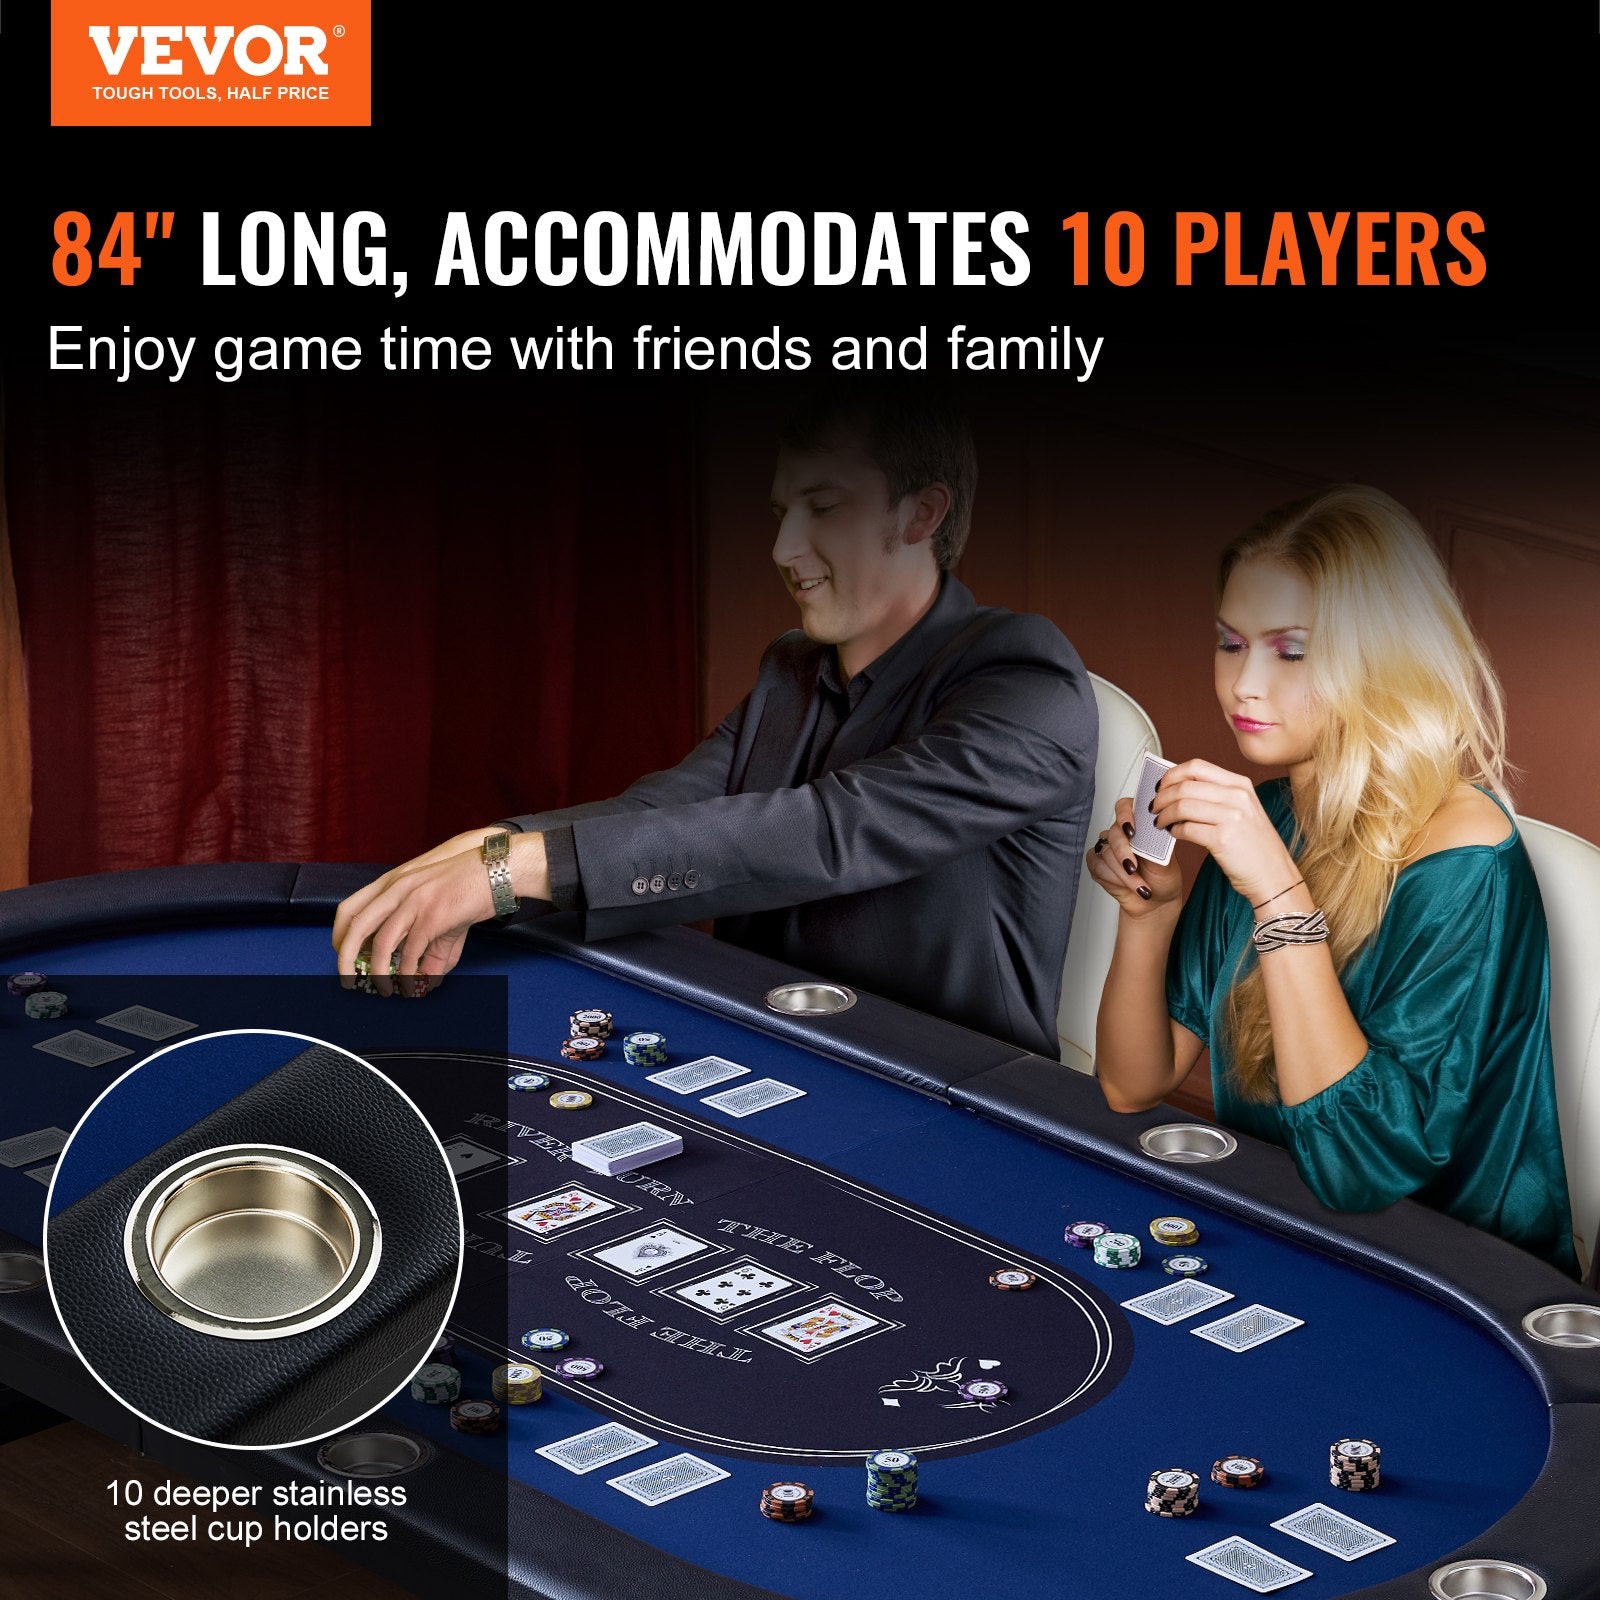 Vevor 10 Player, Foldable 84" Oval Poker Table w/ Stainless Steel Cup Holders and Padded Rails